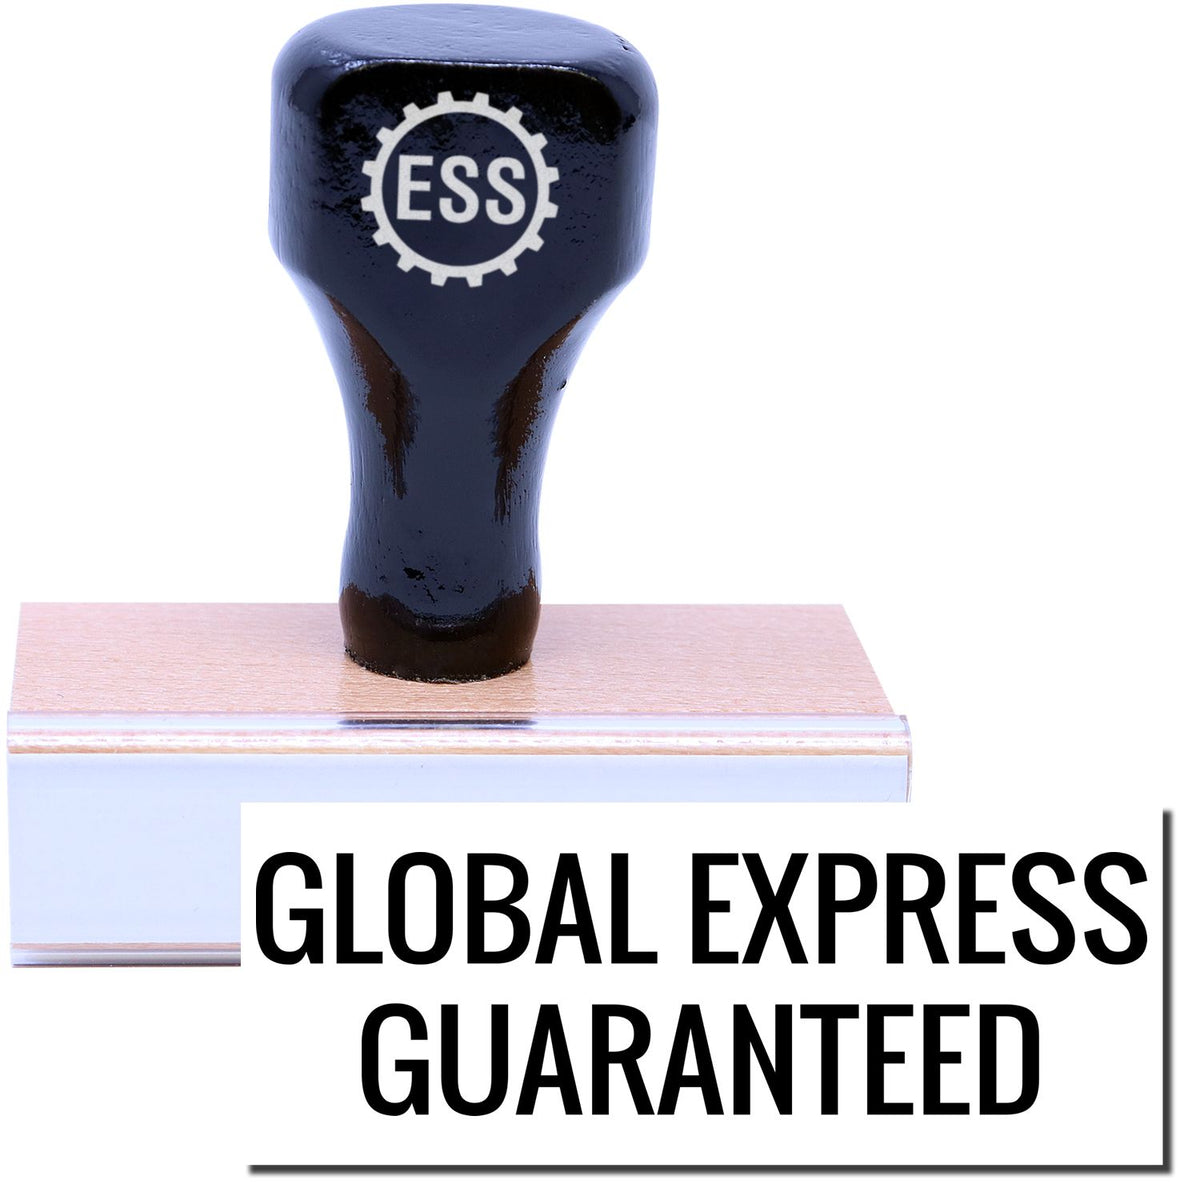 Global Express Guaranteed Rubber Stamp